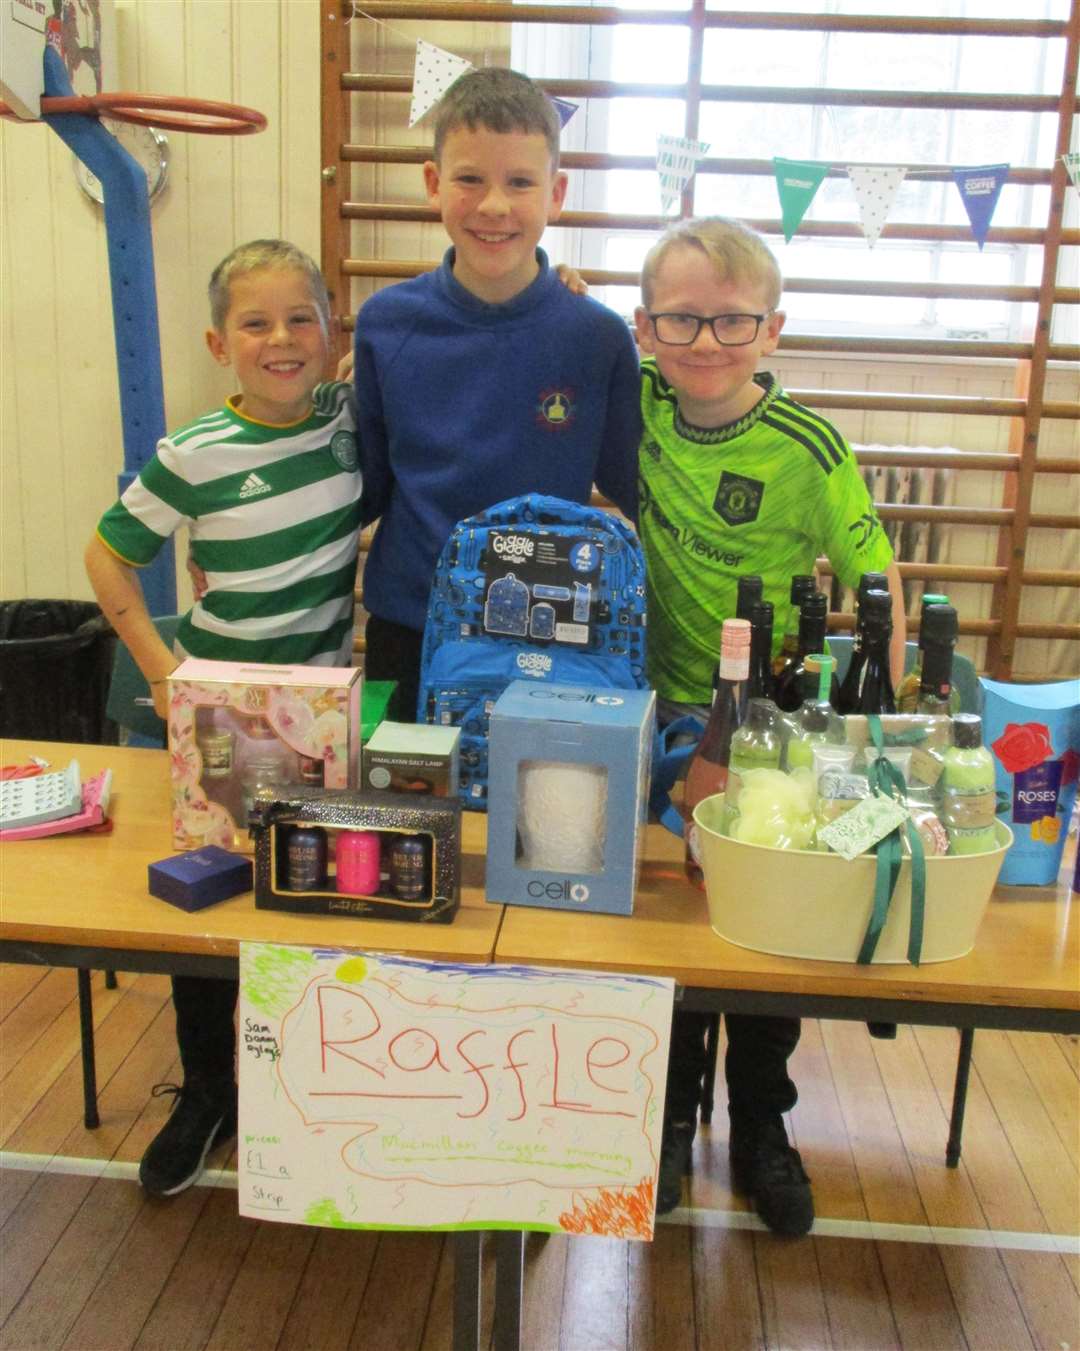 The P7 raffle team ready to do business.